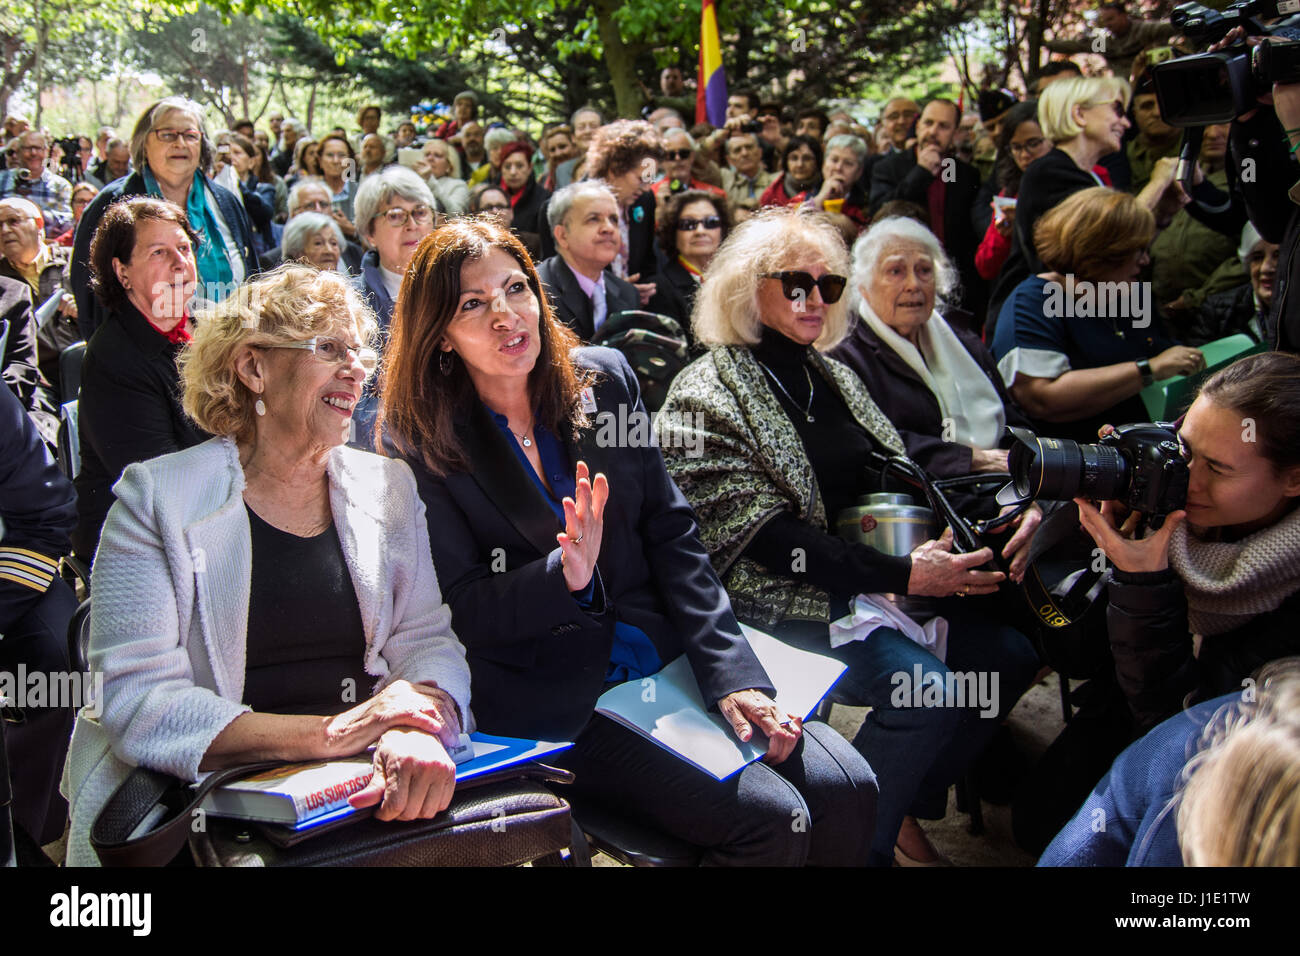 Madrid, Spain. 20th April, 2017. Mayor of Madrid Manuela Carmena (L) and Mayor of Paris Anne Hidalgo (M) during the commemoration of the Garden of the fighters of 'The Nine', the battalion of Spaniards that liberated Paris of Nazism, in Madrid, Spain. Credit: Marcos del Mazo /Alamy Live News Stock Photo